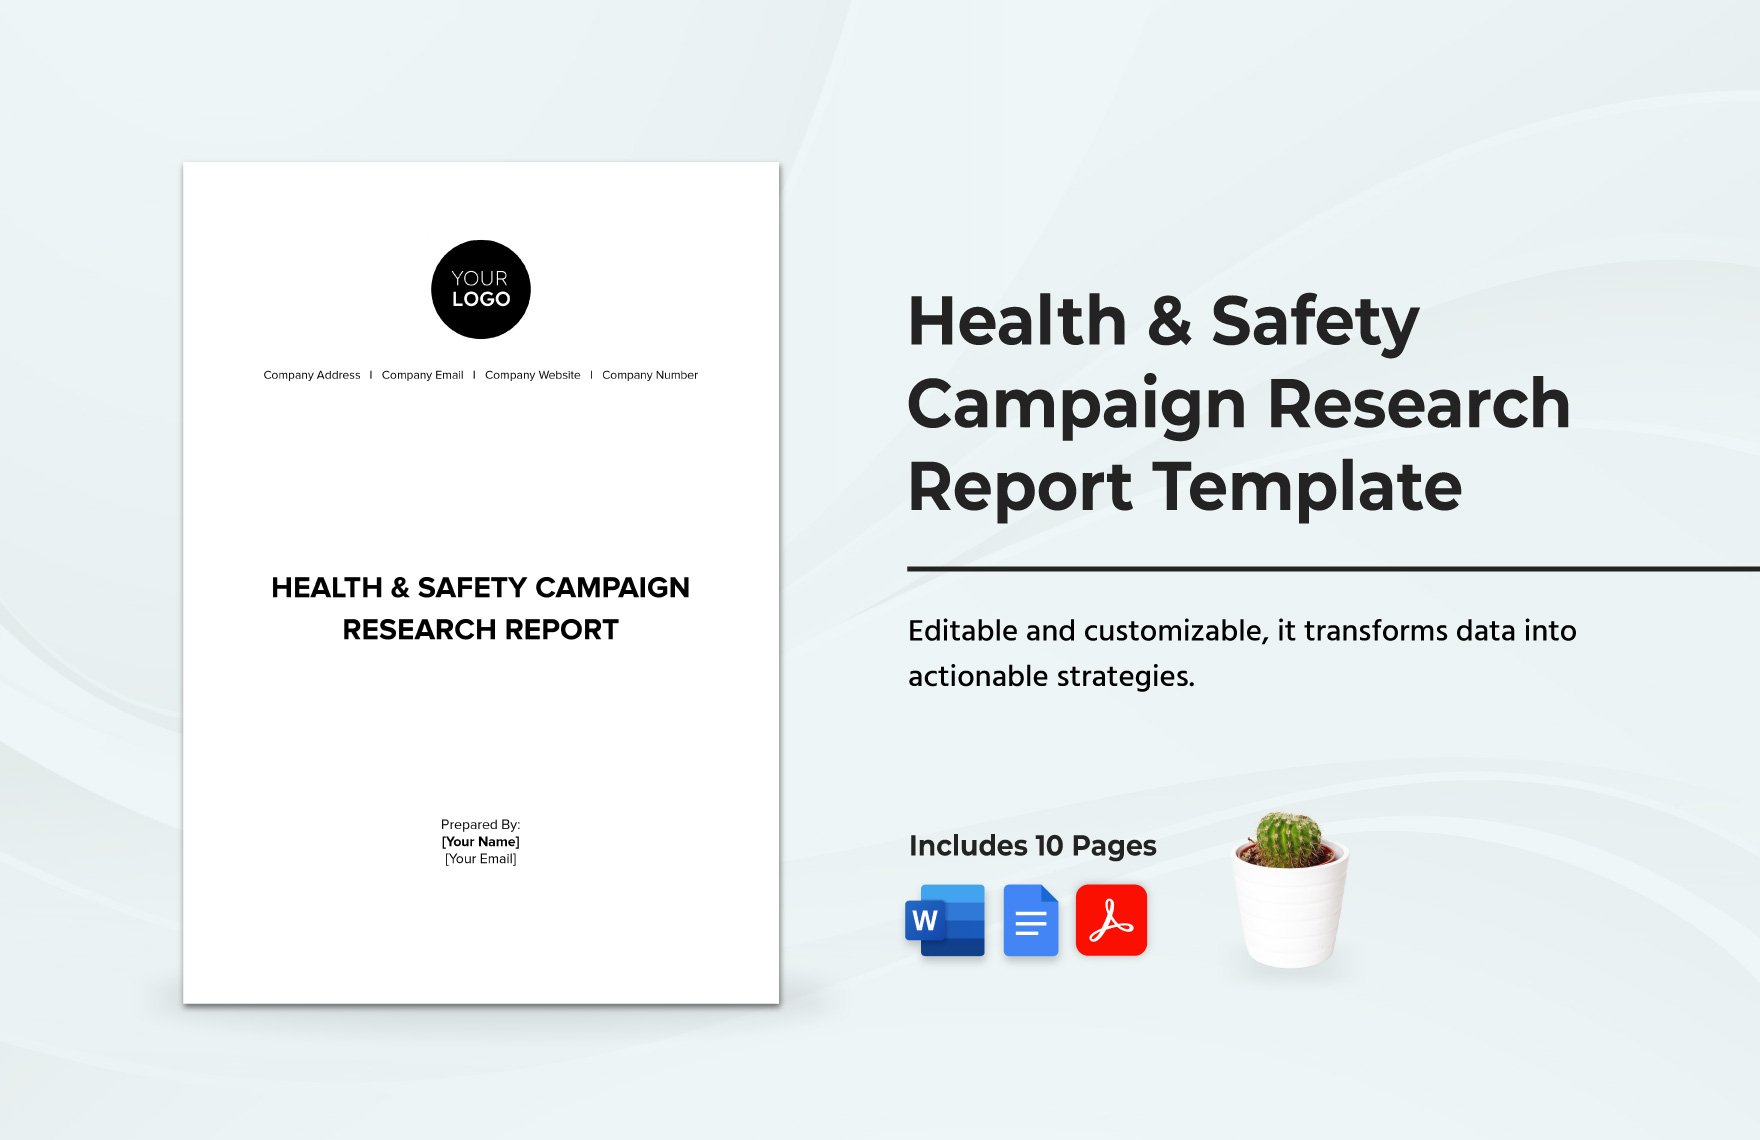 Health & Safety Campaign Research Report Template